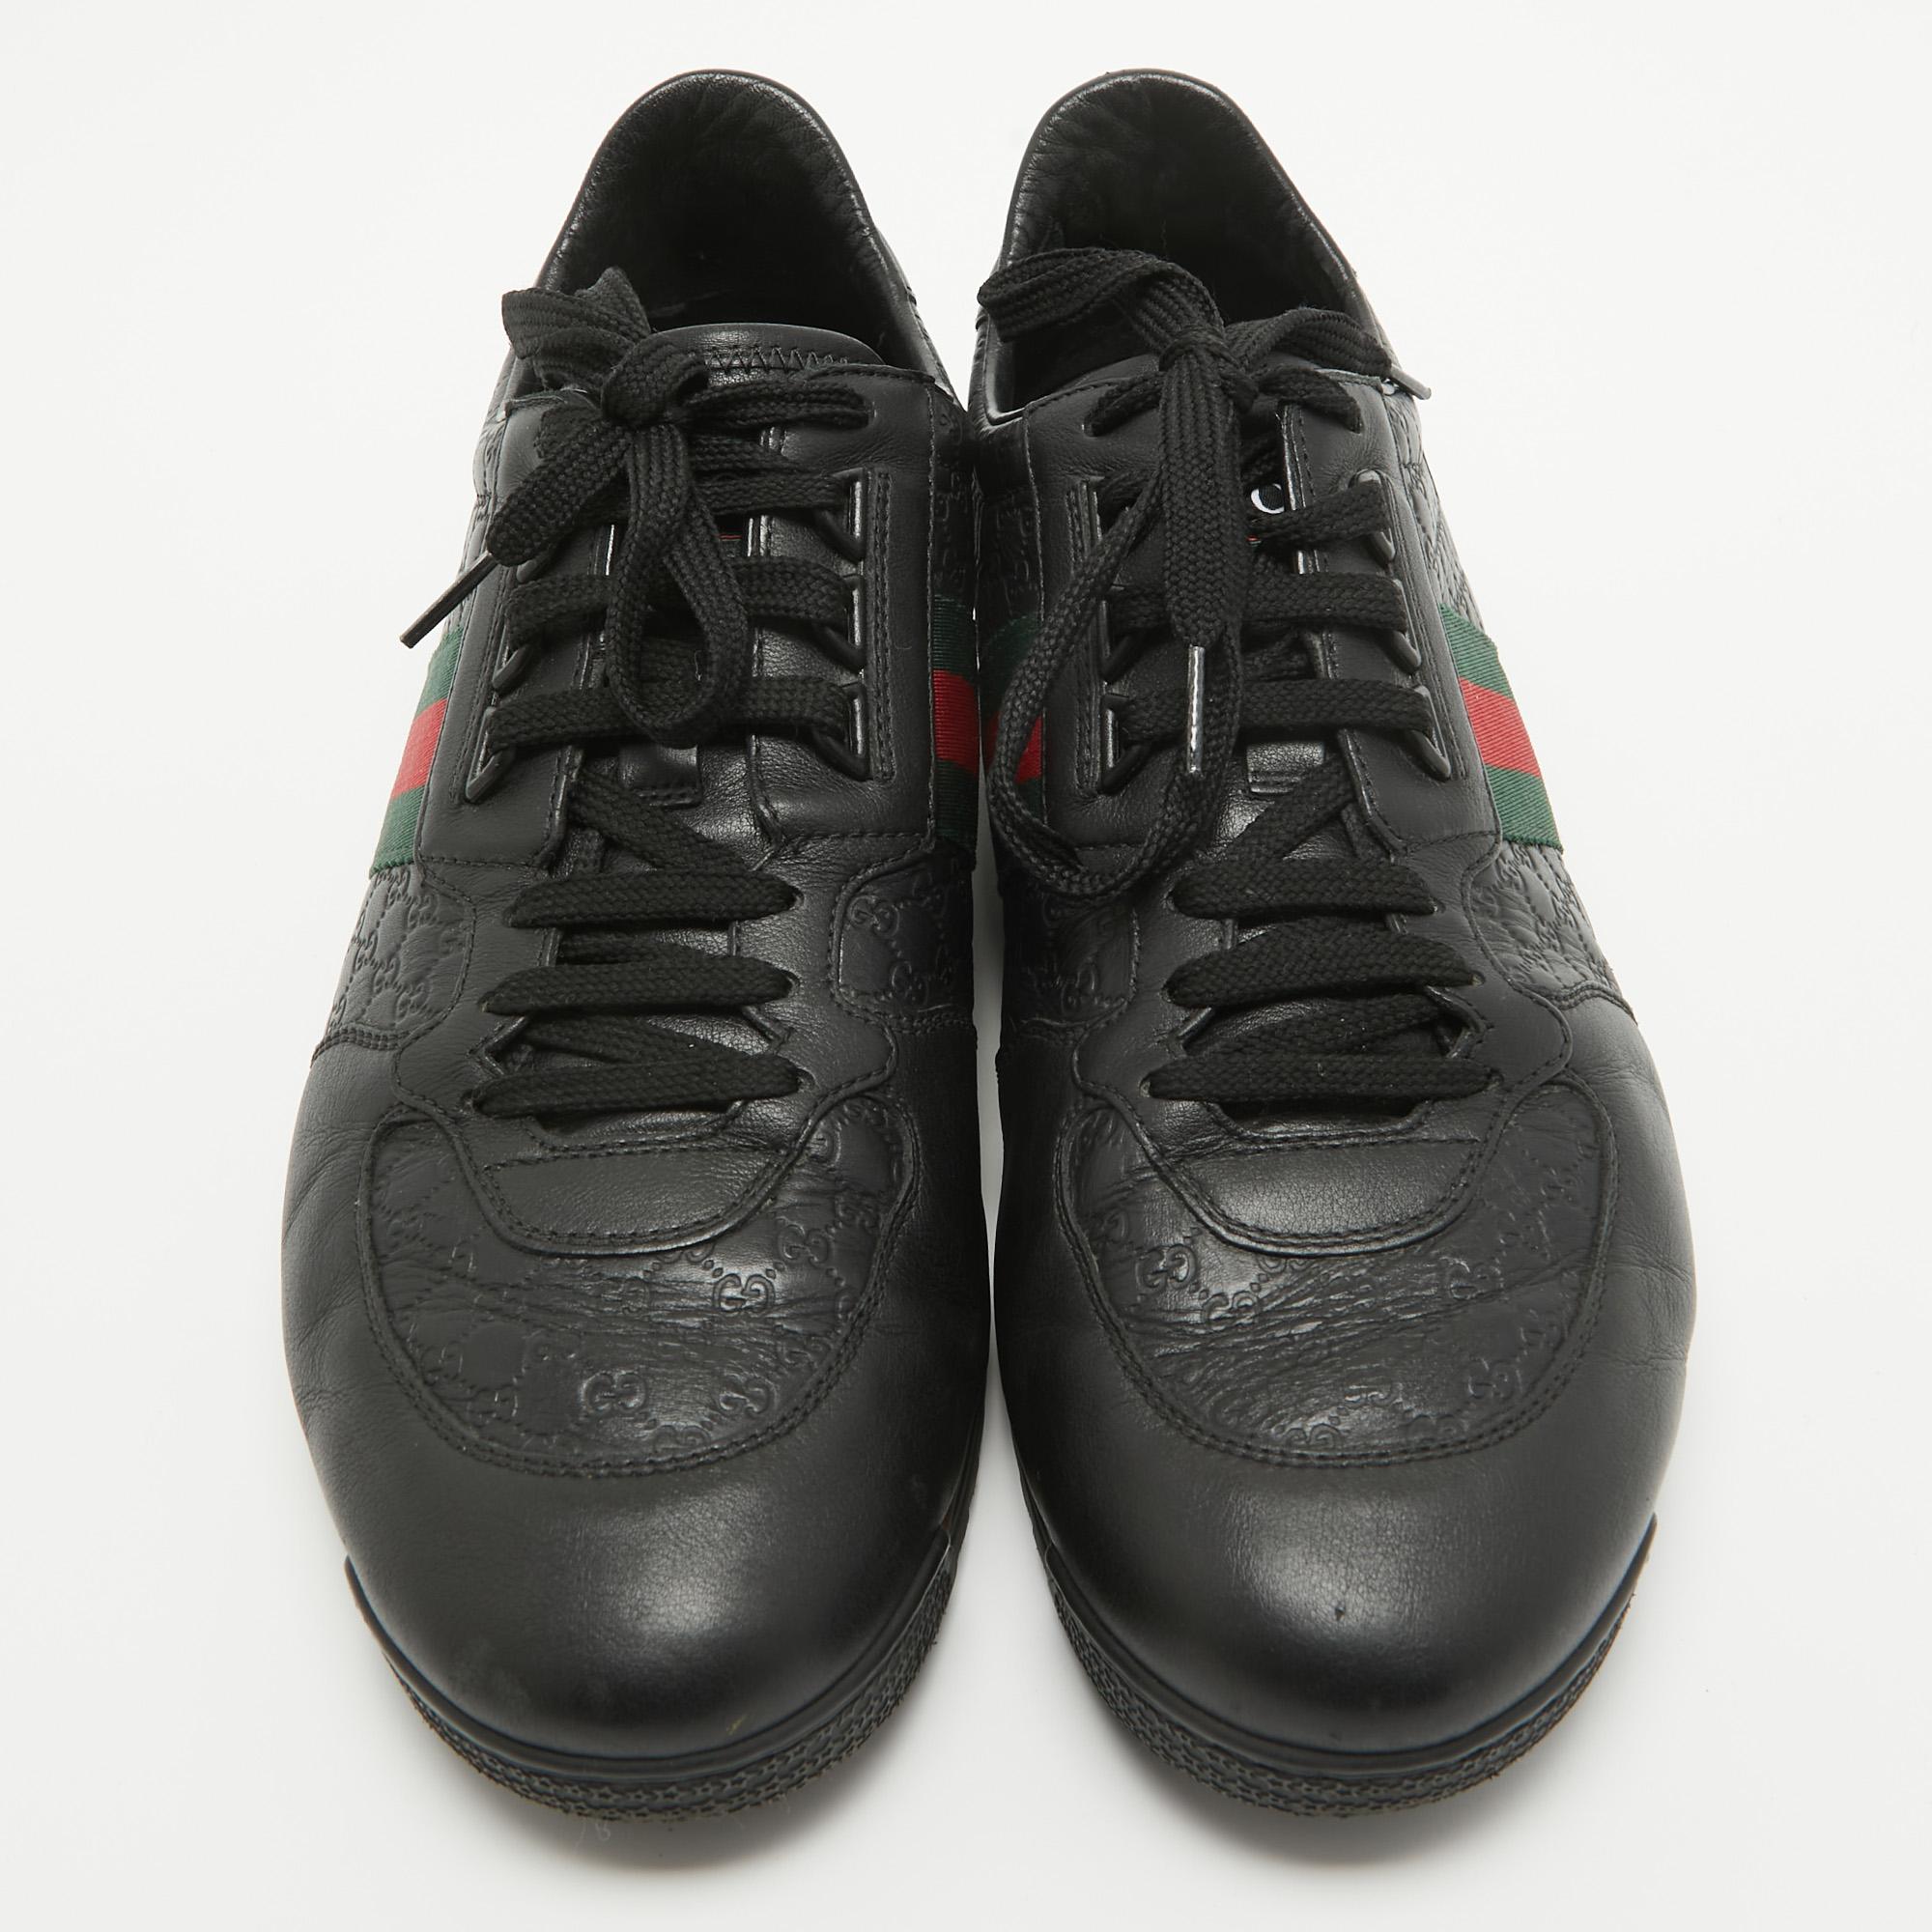 Gucci Black Guccissima Leather Web Ace Sneakers Size 45.5 For Sale 1